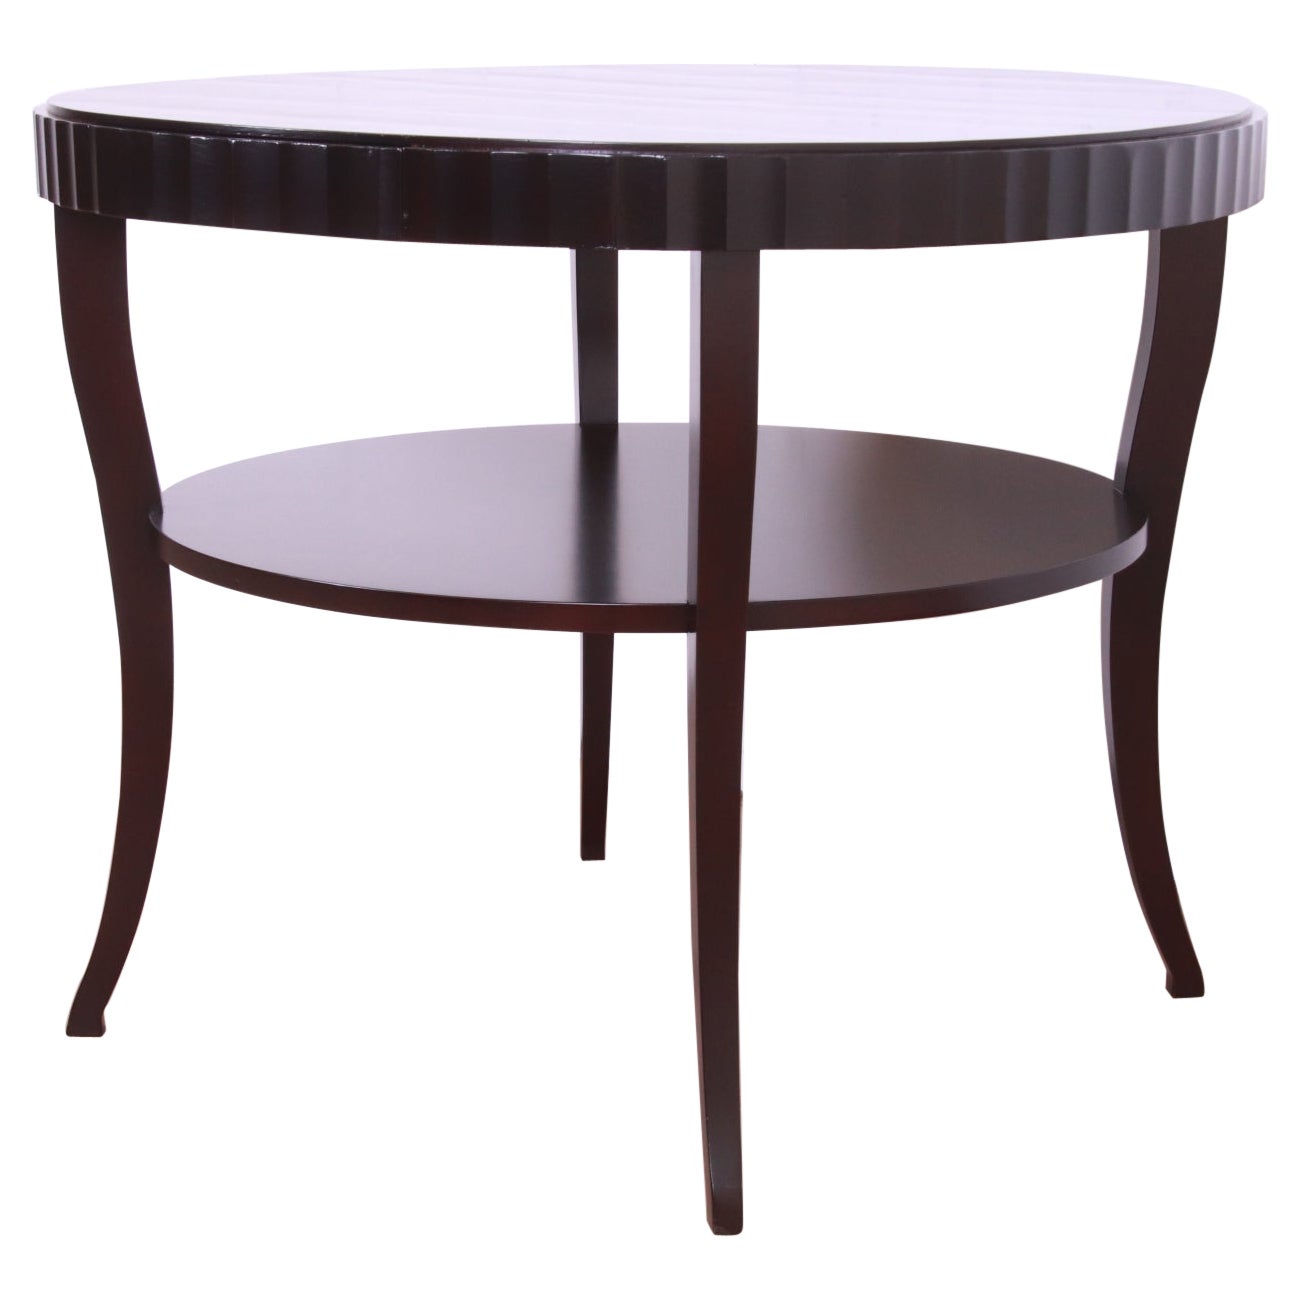 Barbara Barry for Baker Furniture Dark Mahogany Two-Tier Center Table